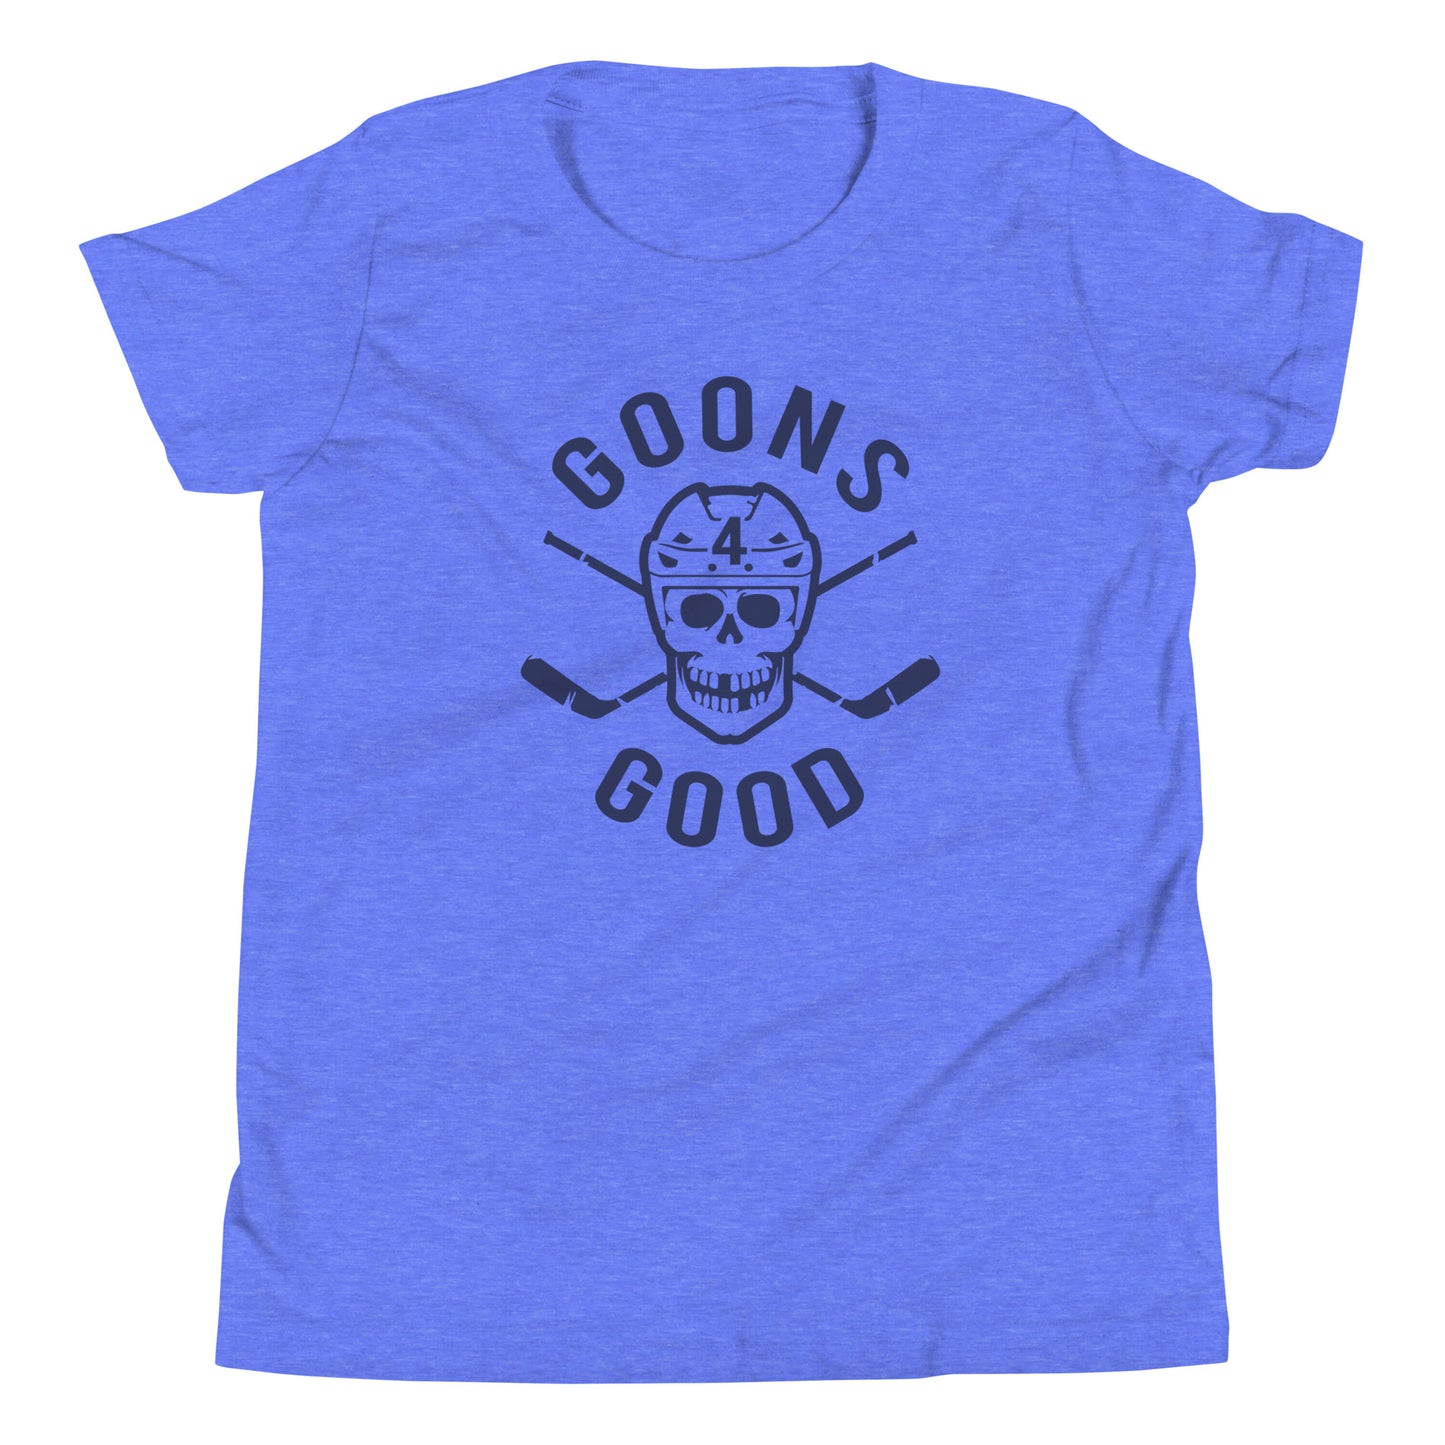 GOONS 4 GOOD | YOUTH SIZE | T-SHIRT